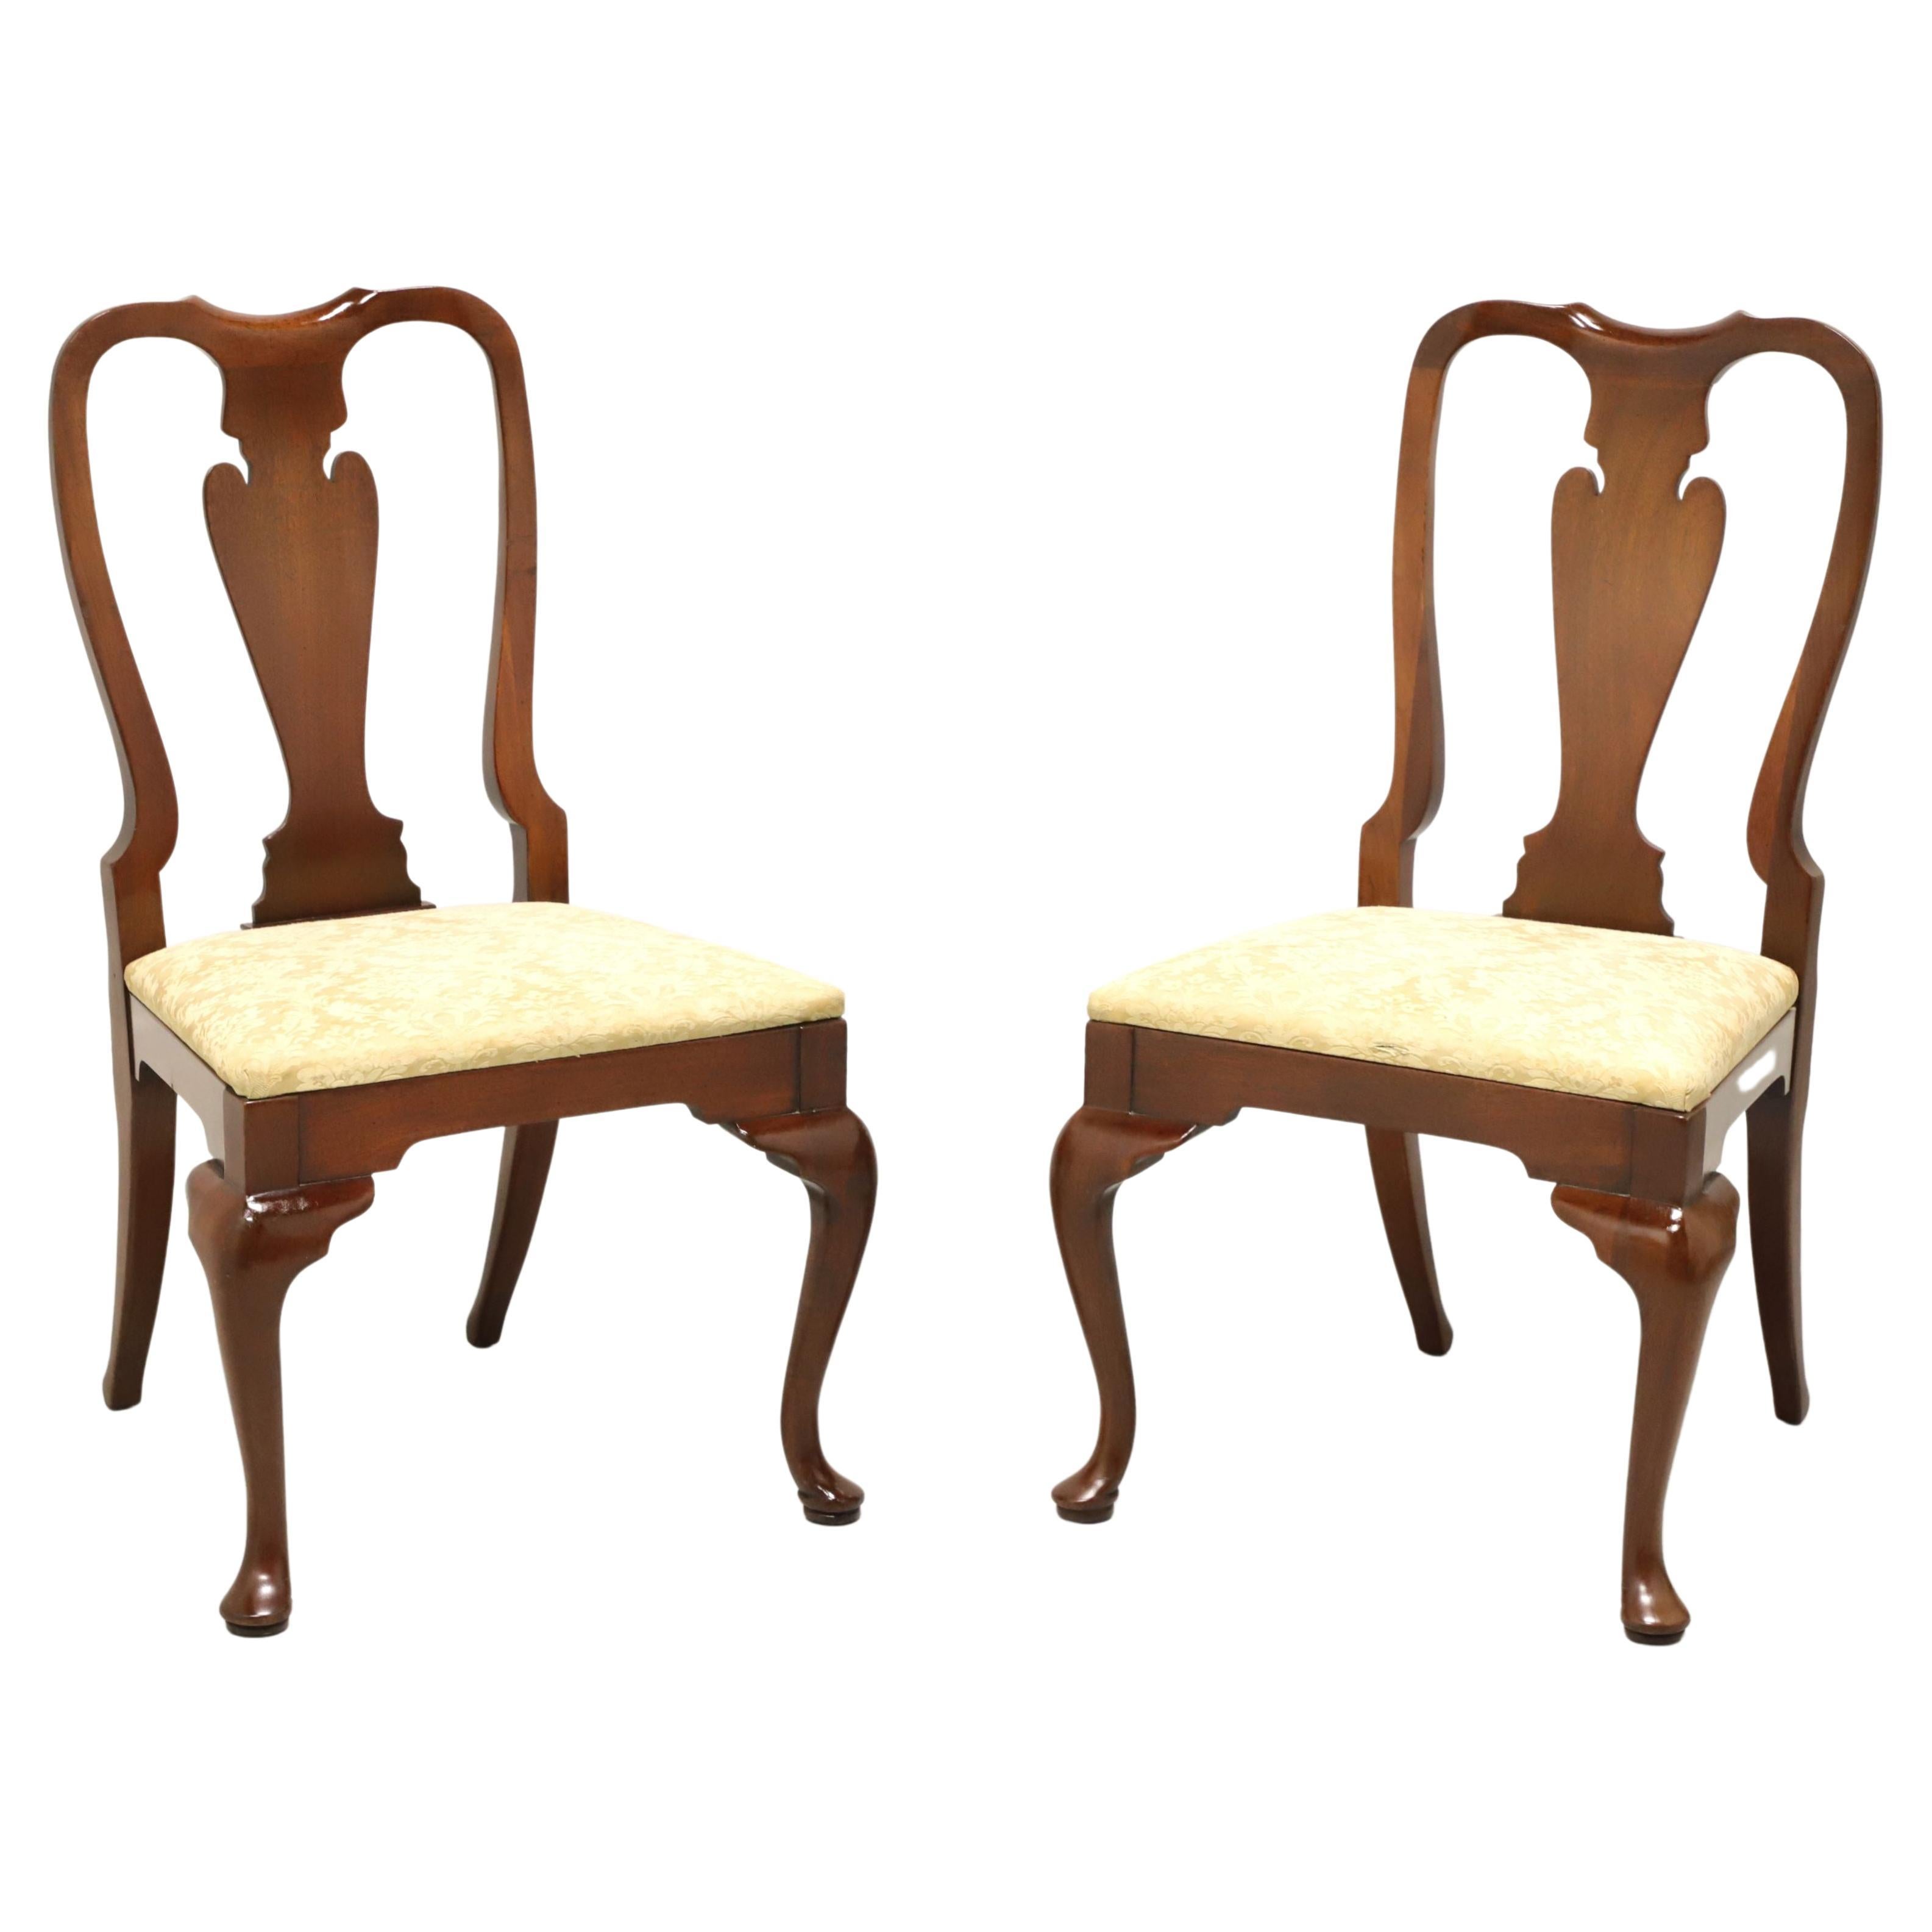 HICKORY CHAIR Amber Mahogany Queen Anne Dining Side Chairs - Pair C